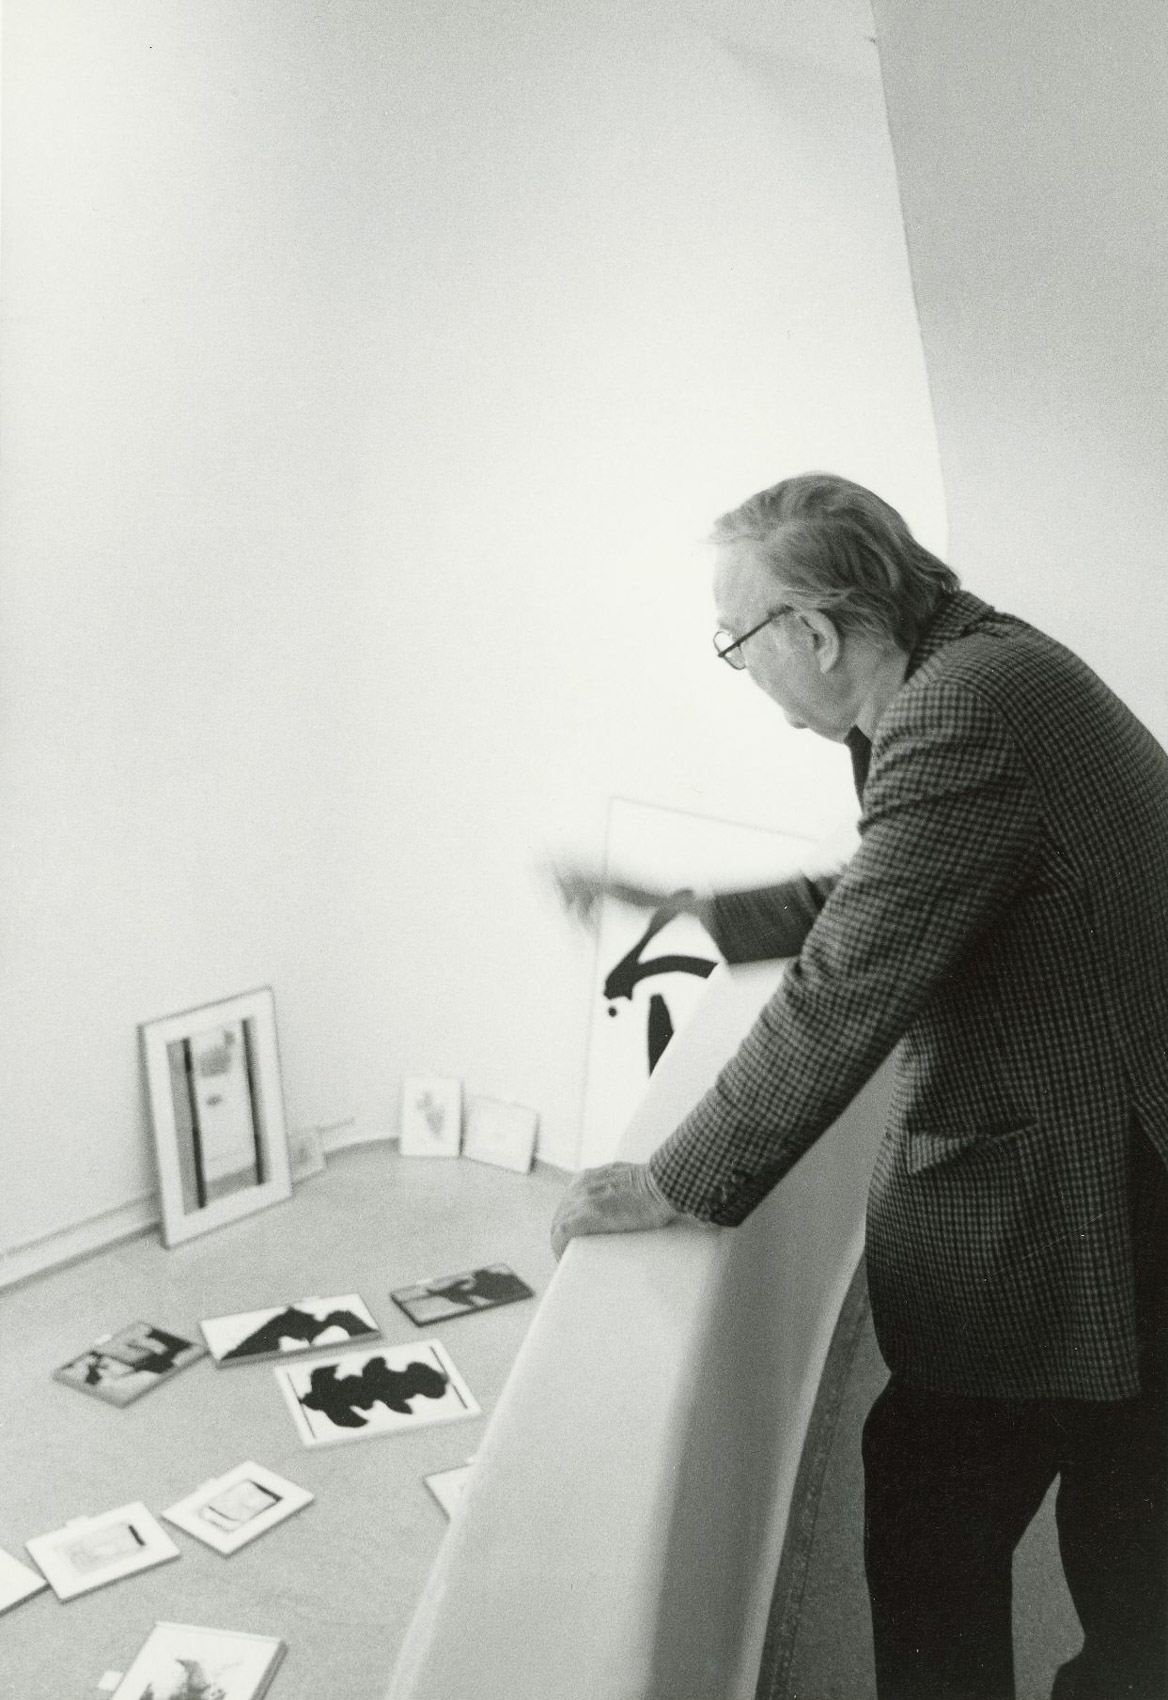 Motherwell supervising the installation of Motherwell’s 1984 retrospective at the Solomon R. Guggenheim Museum